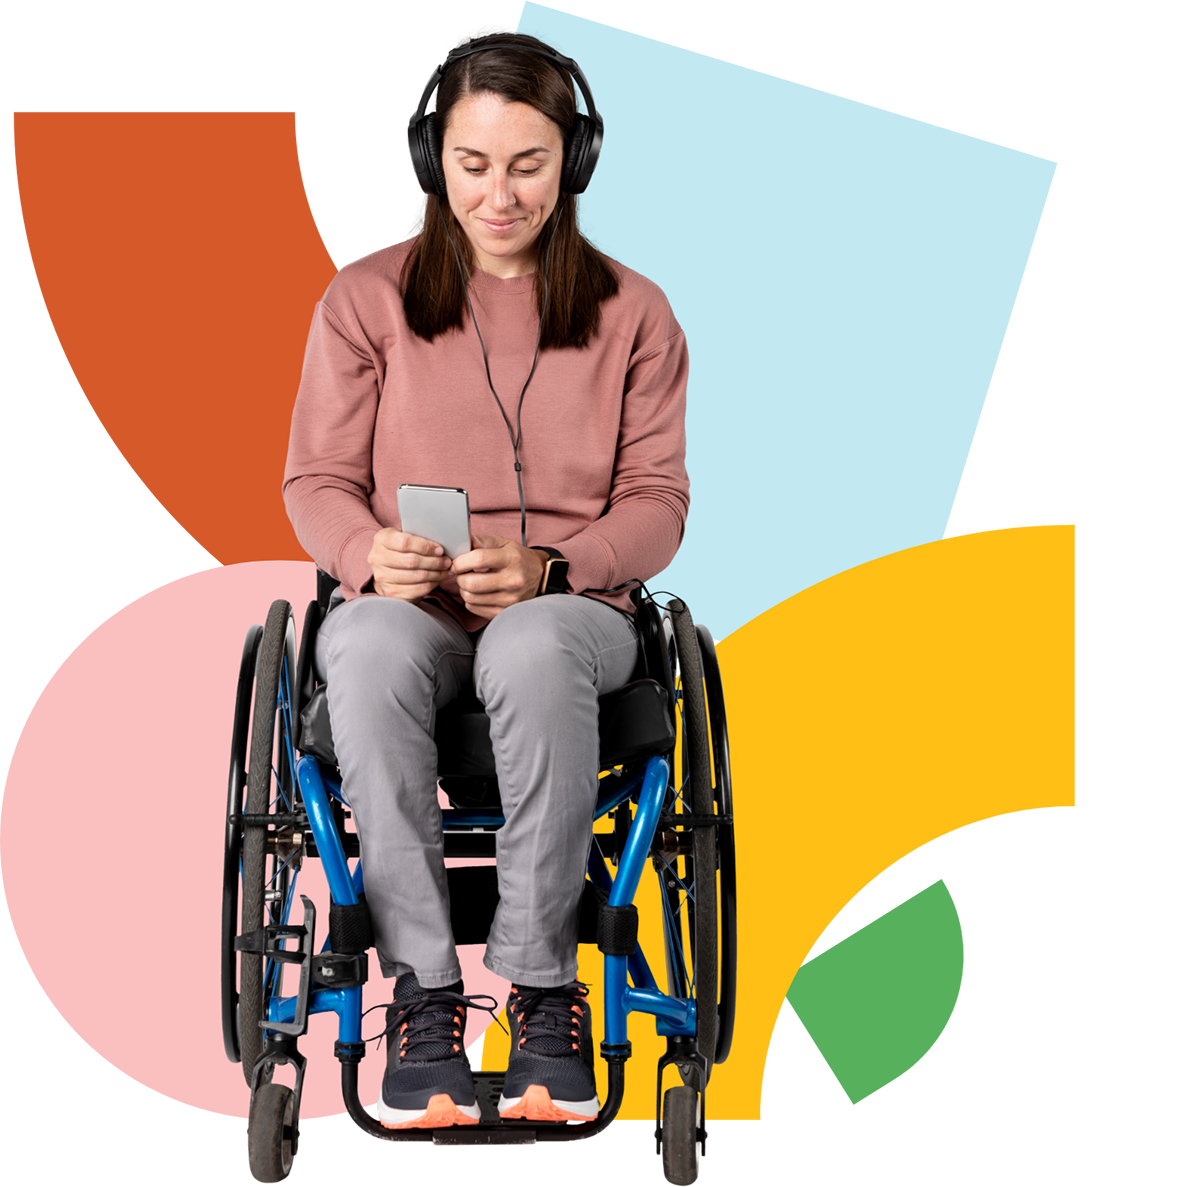 A collage of a woman wearing headphones, using a smartphone and sitting in a wheelchair